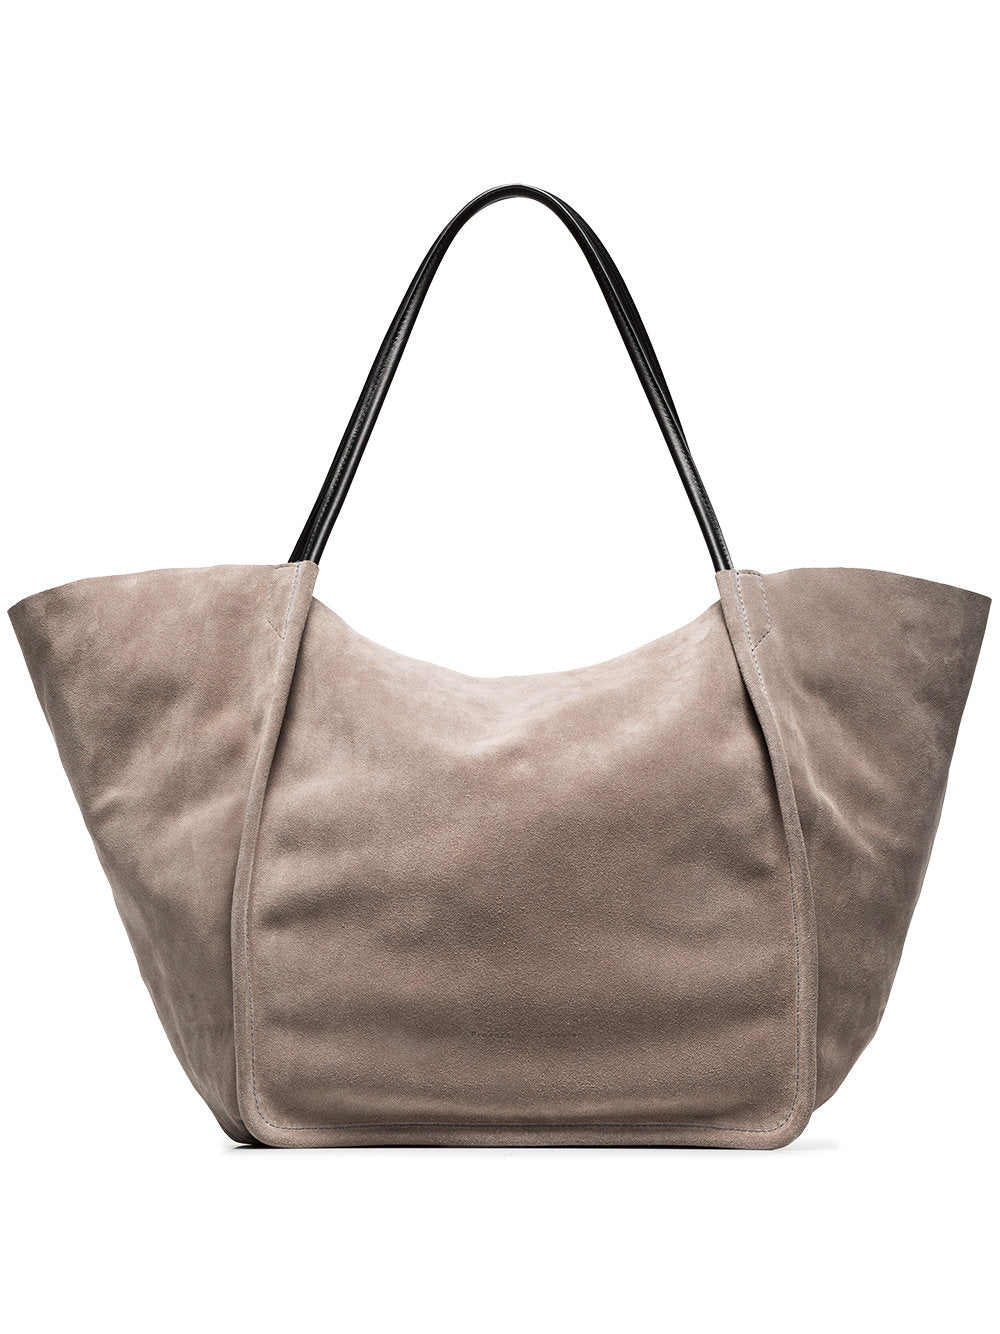 Archive Extra Large Tote